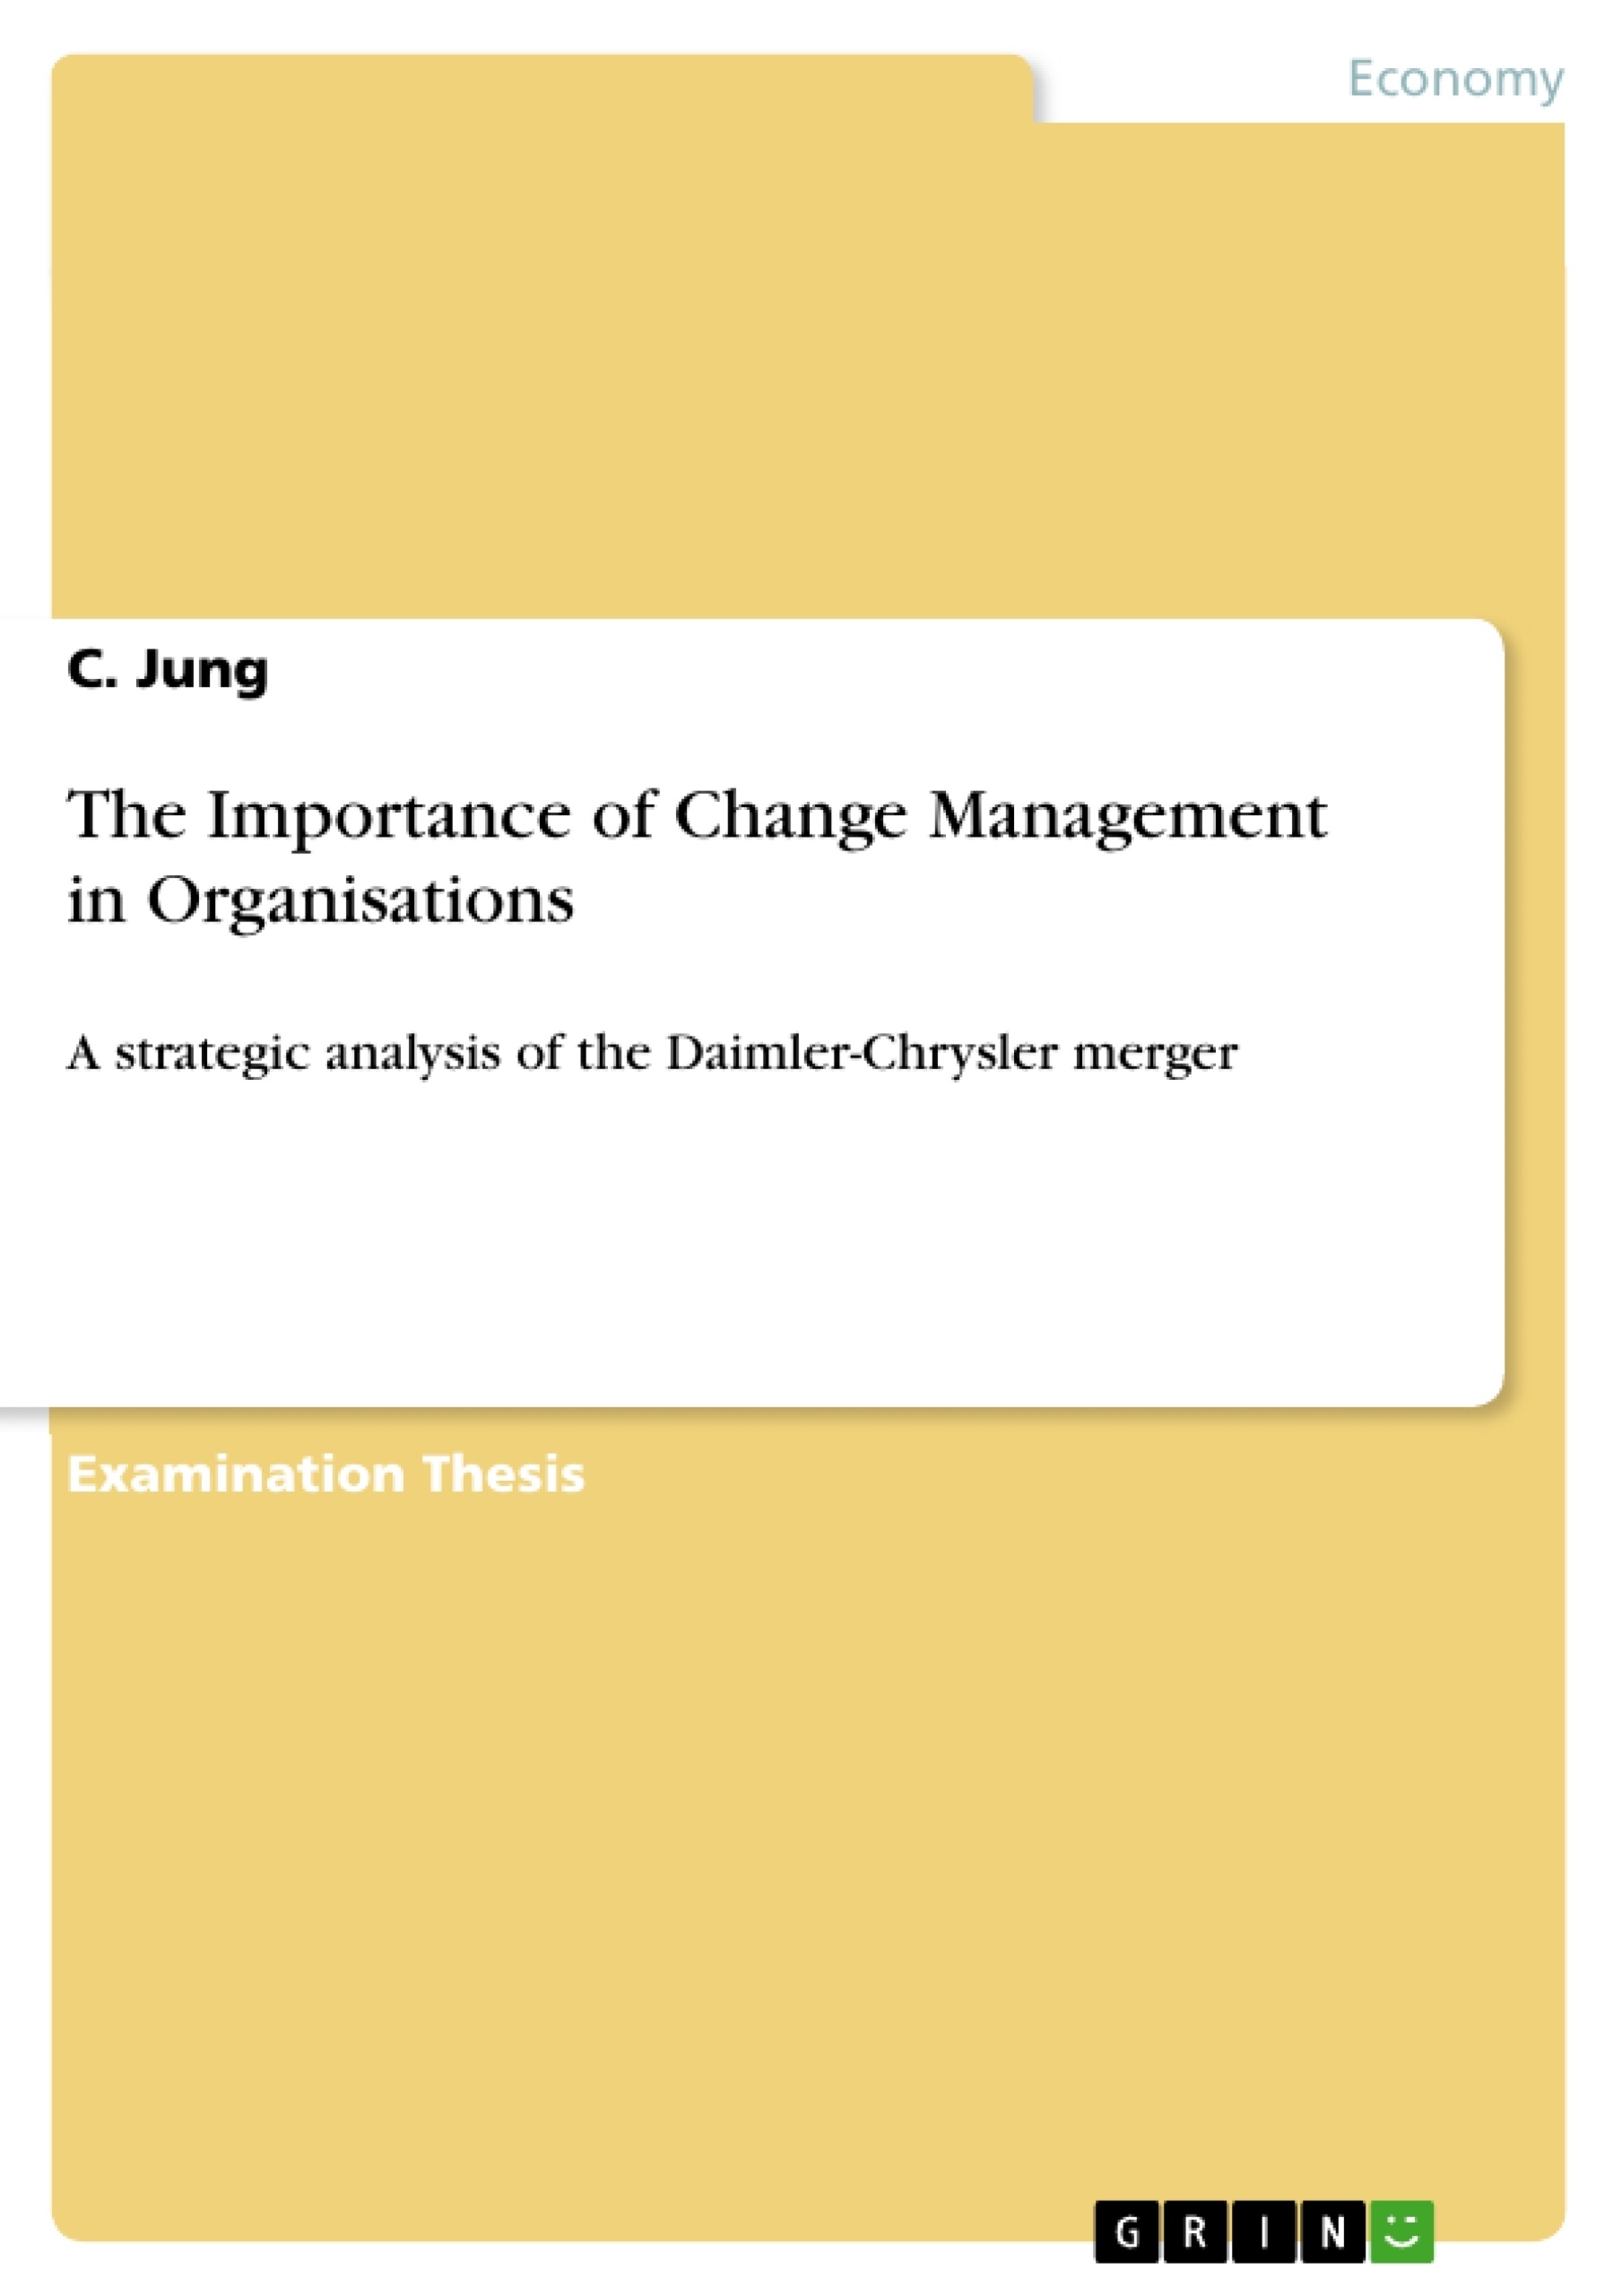 Título: The Importance of Change Management in Organisations